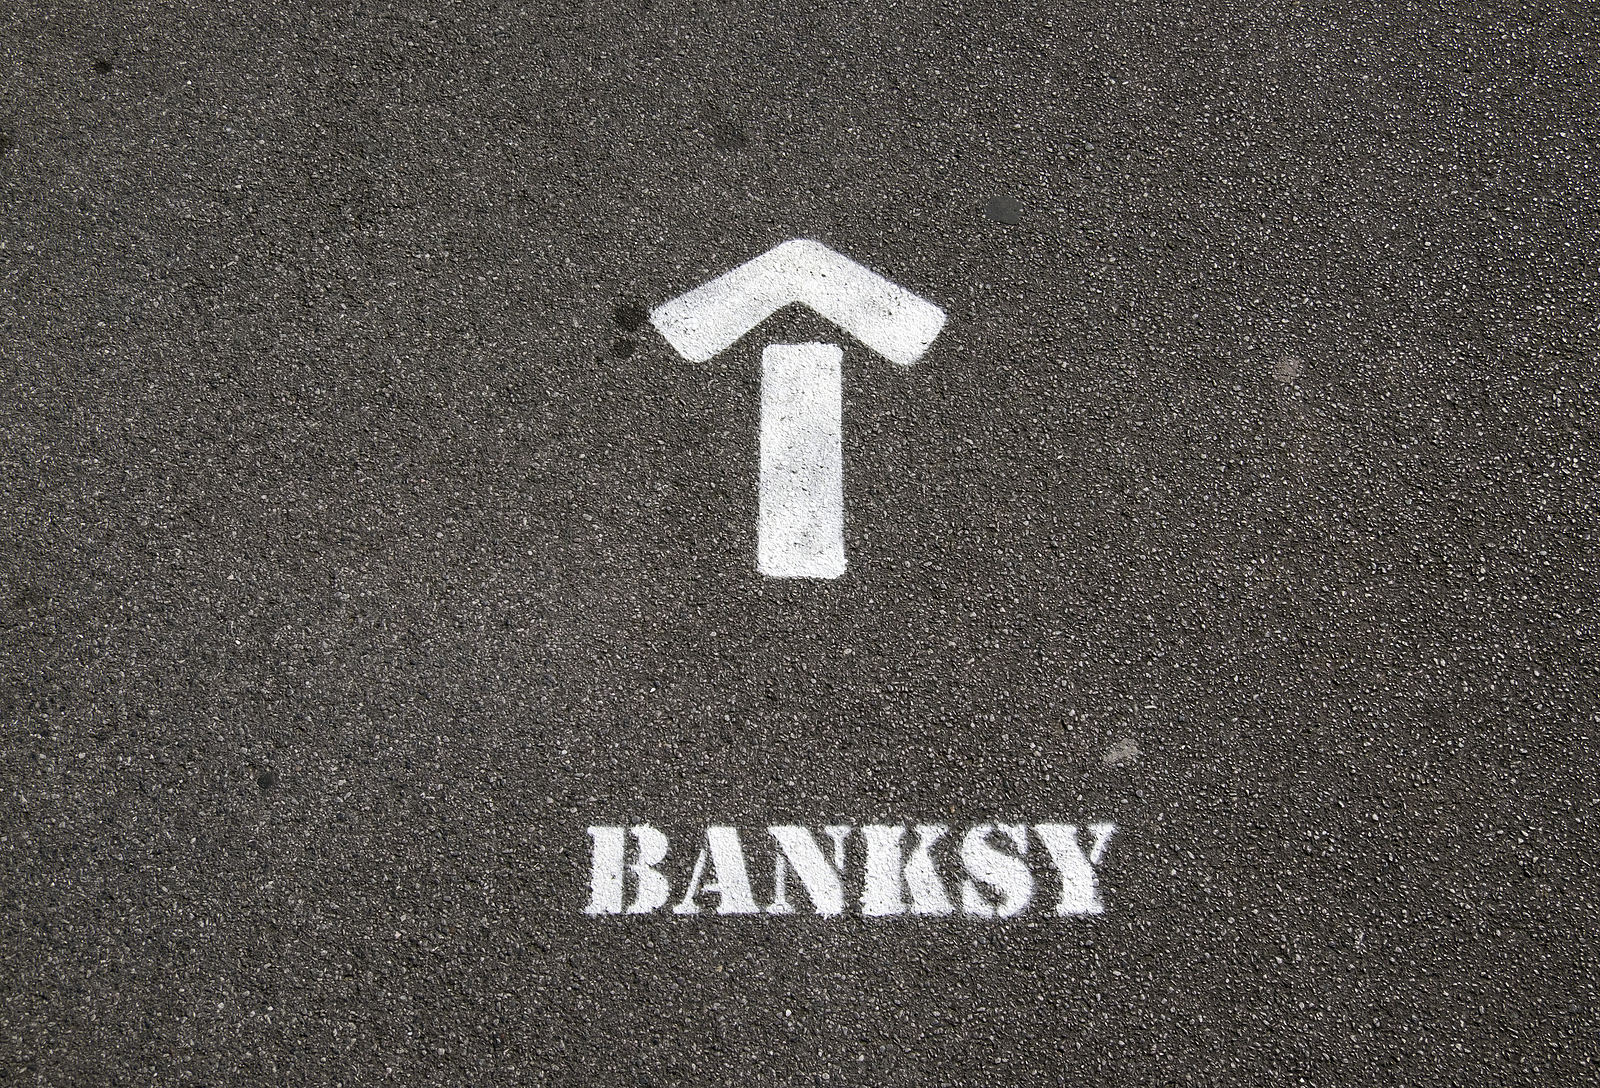 Banksy's Top 5 Most Controversial Works